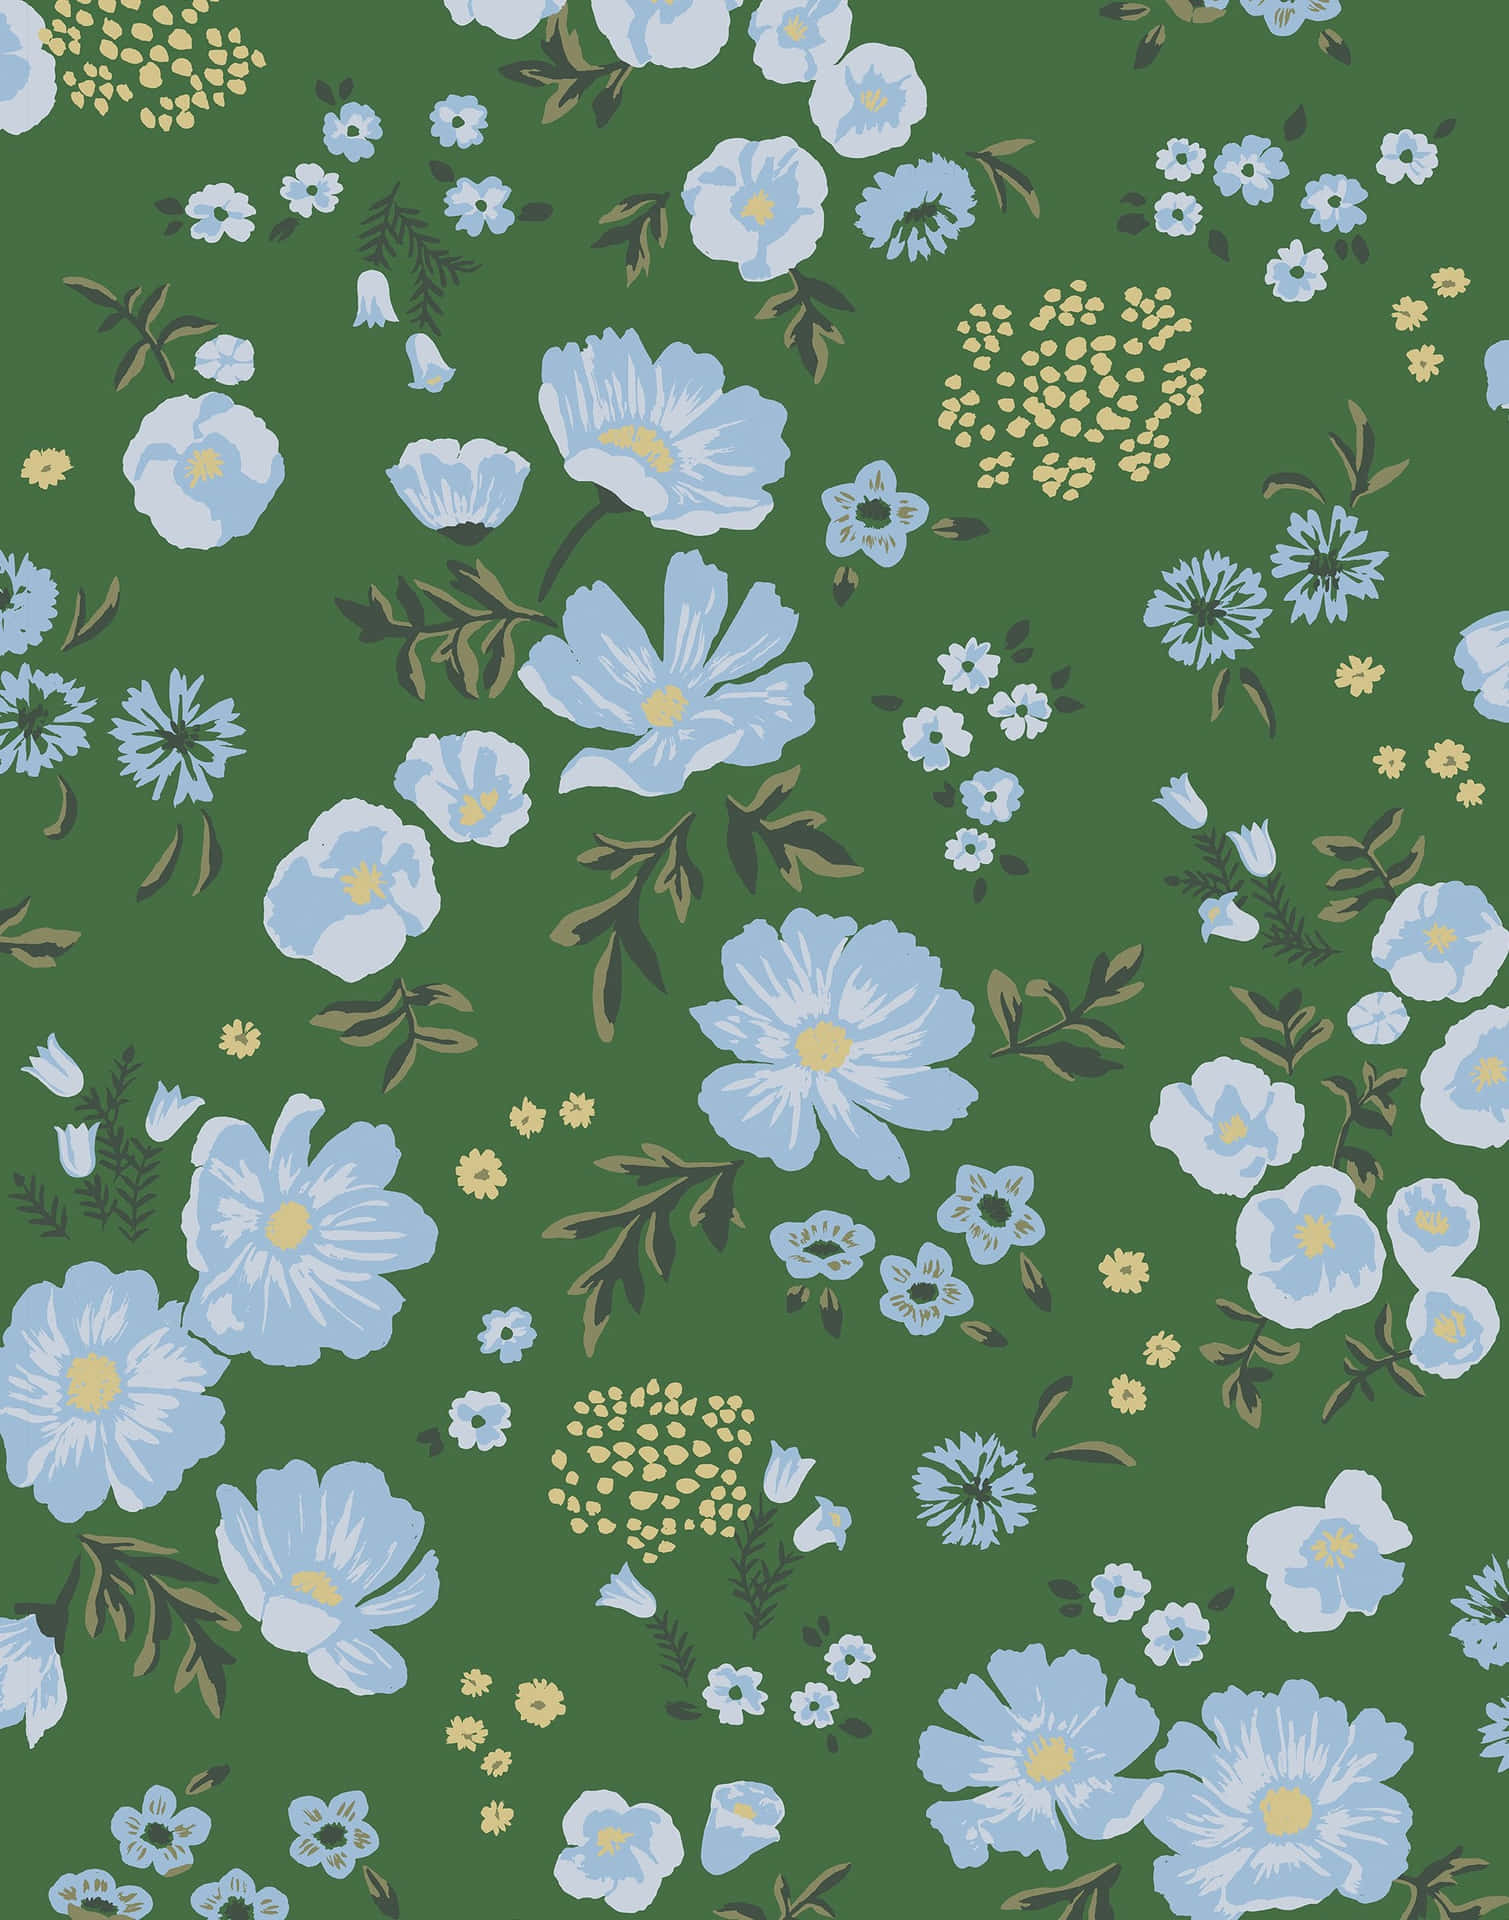 A vibrant blue floral background perfect for any special occasion